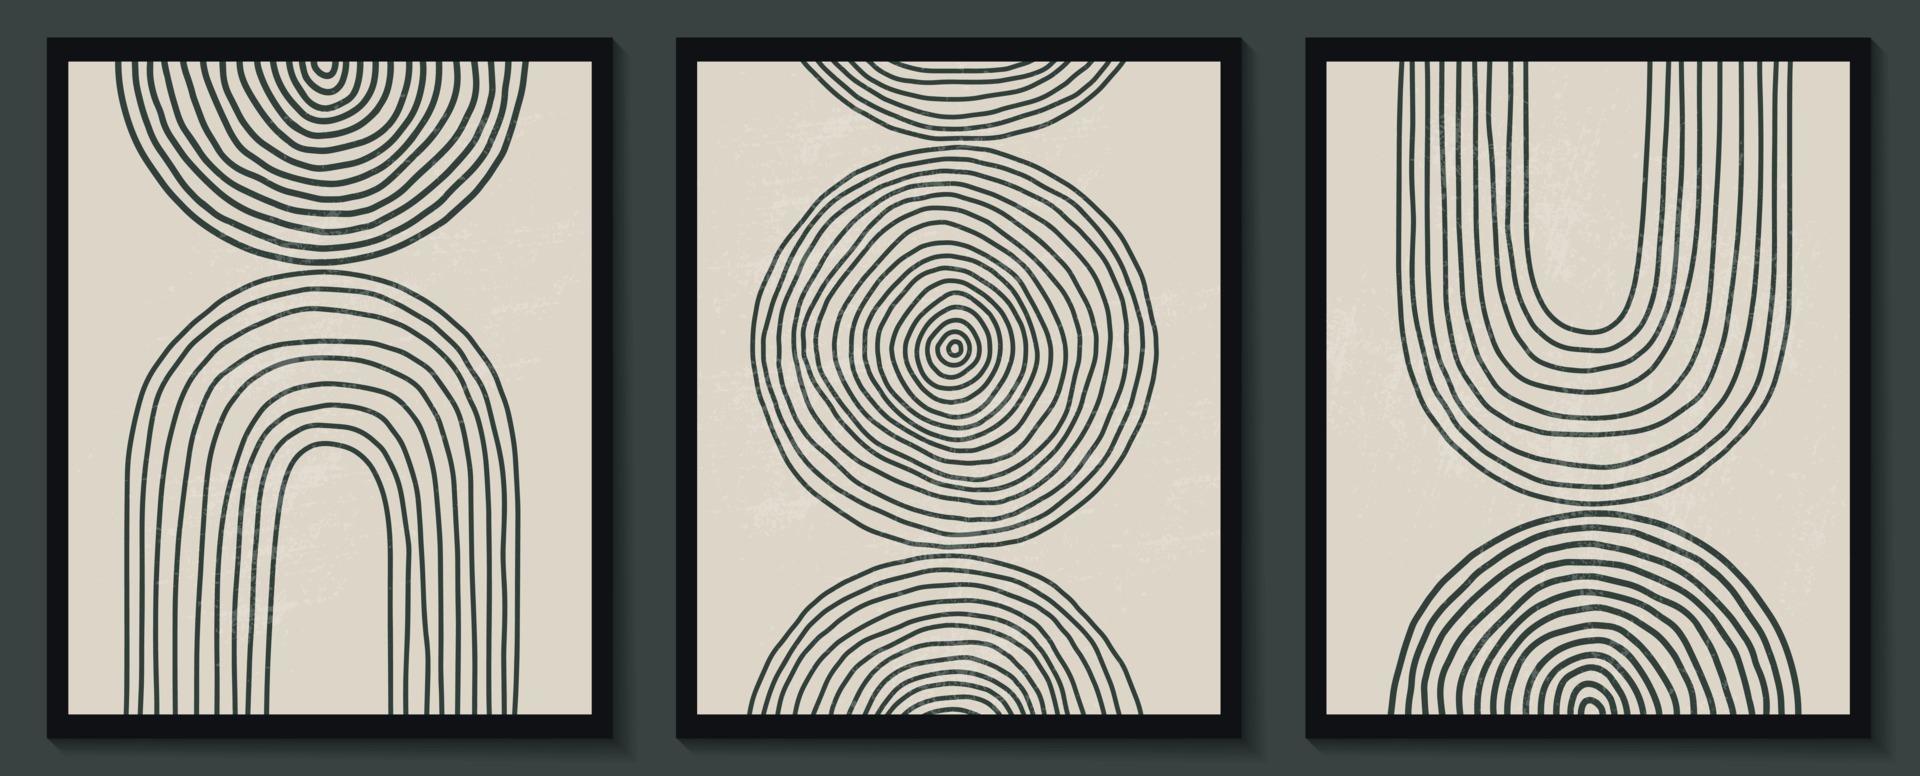 Trendy contemporary set of abstract creative geometric minimalist artistic hand painted composition. Vector posters for wall decor in vintage style